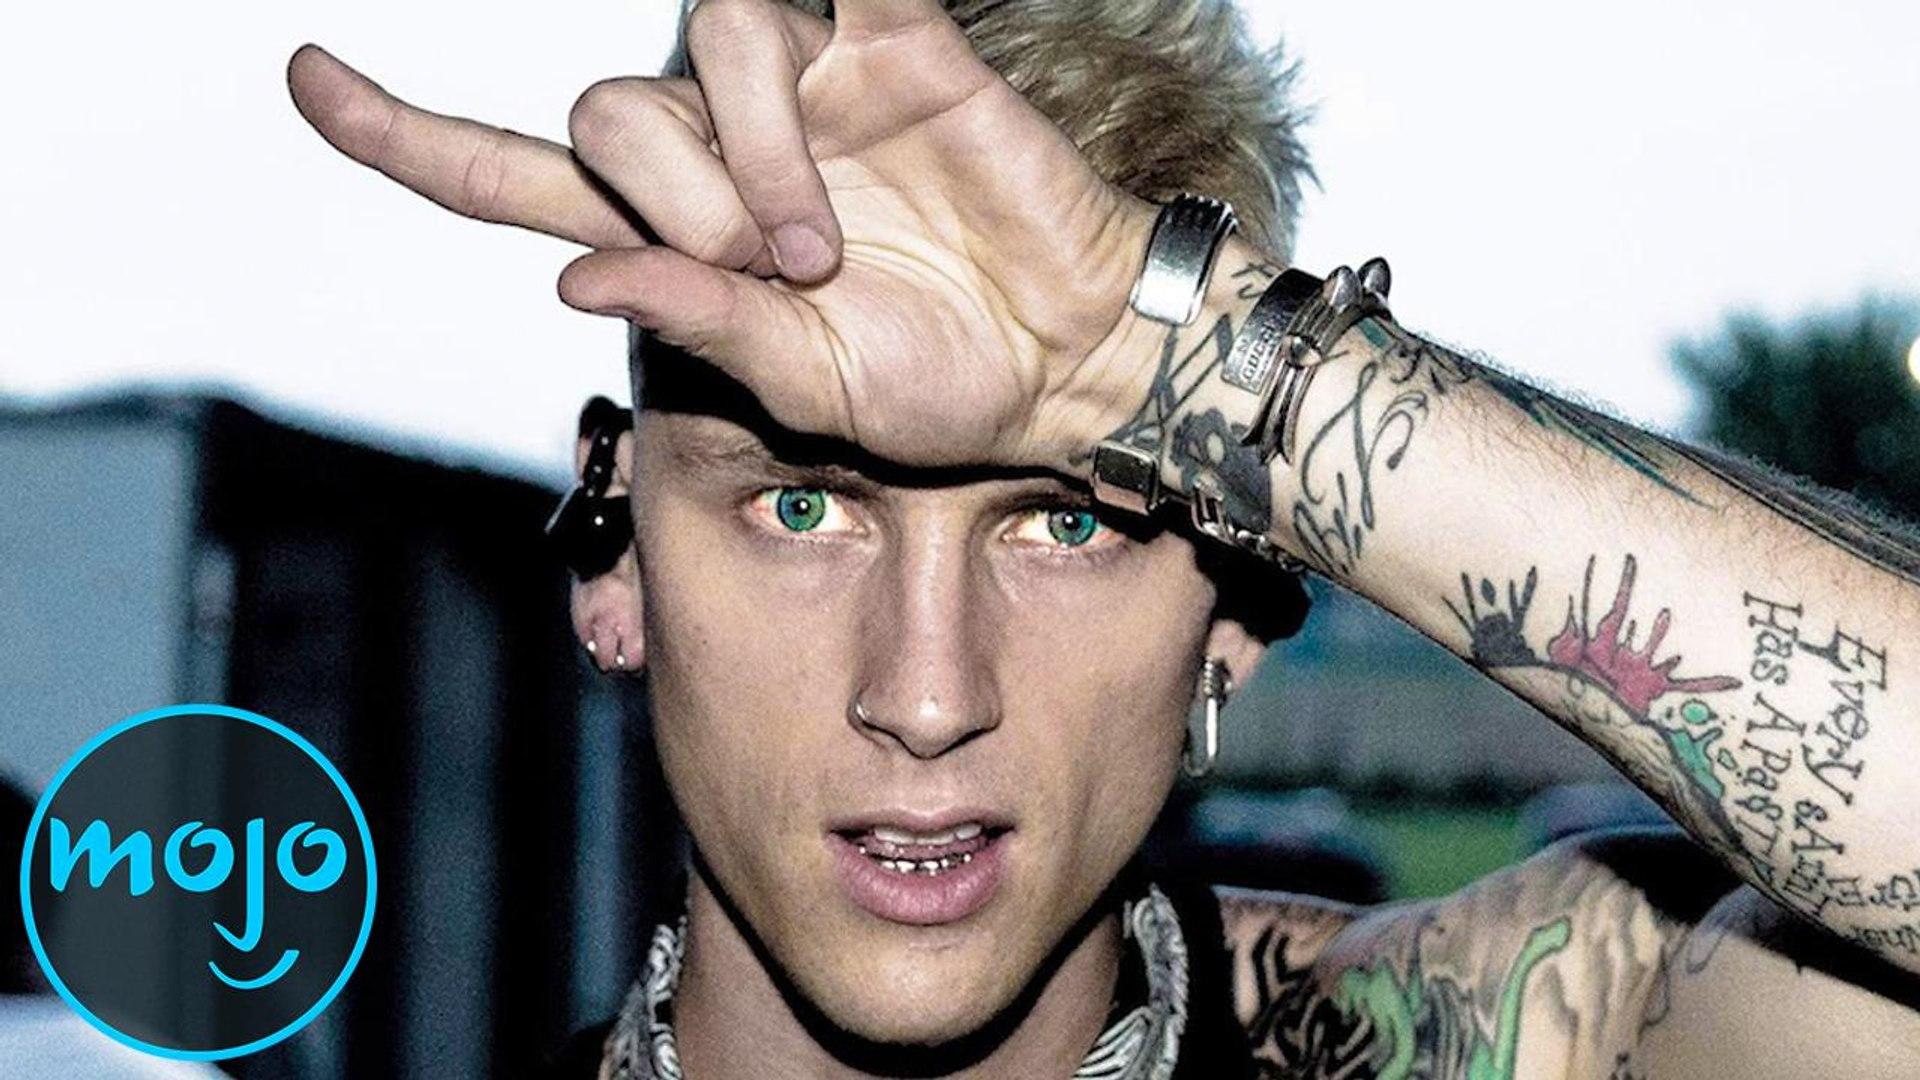 Top 5 Things You Should Know About Machine Gun Kelly.